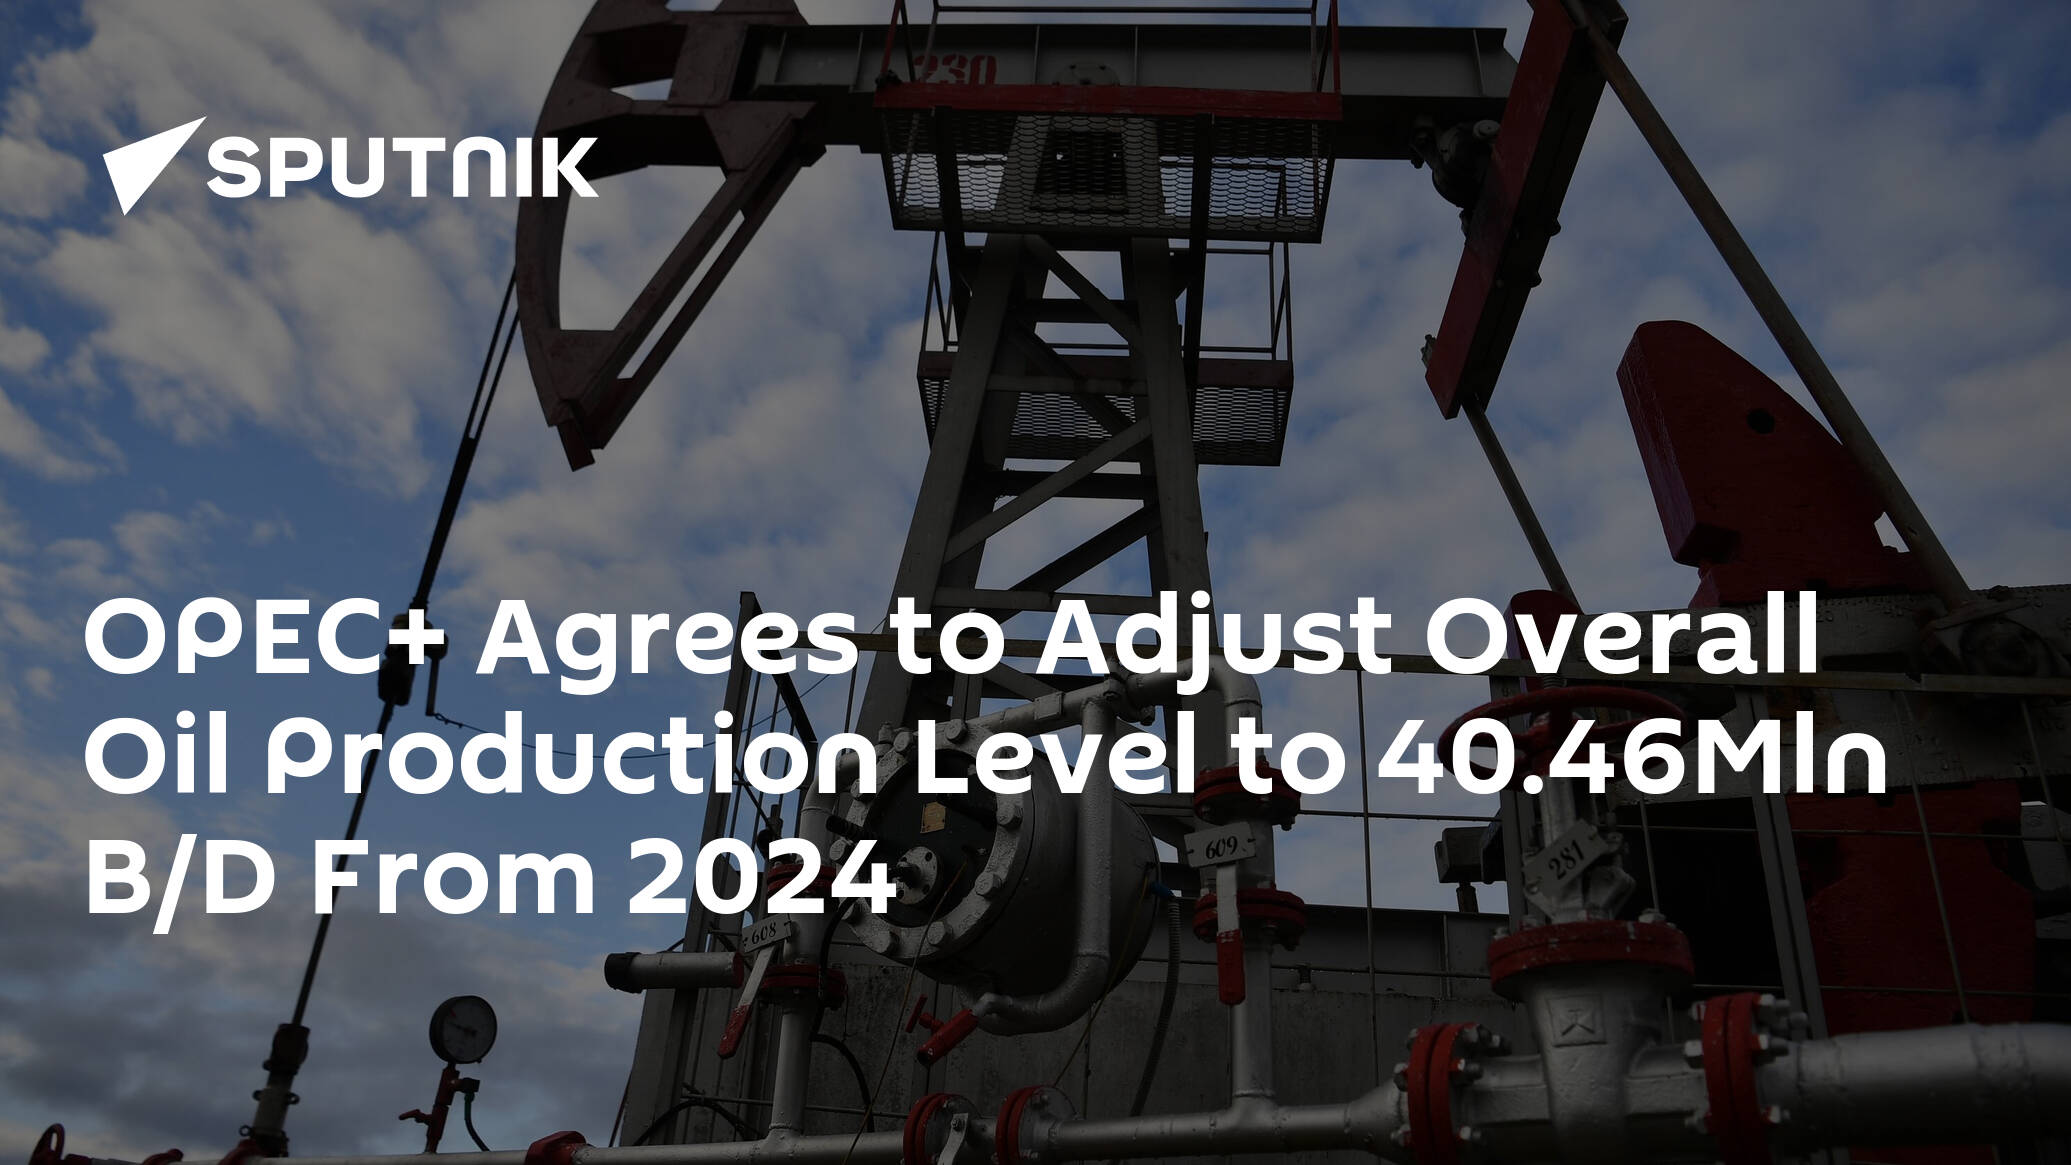 OPEC+ Agrees to Adjust Overall Oil Production Level to 40.46Mln B/D From 2024